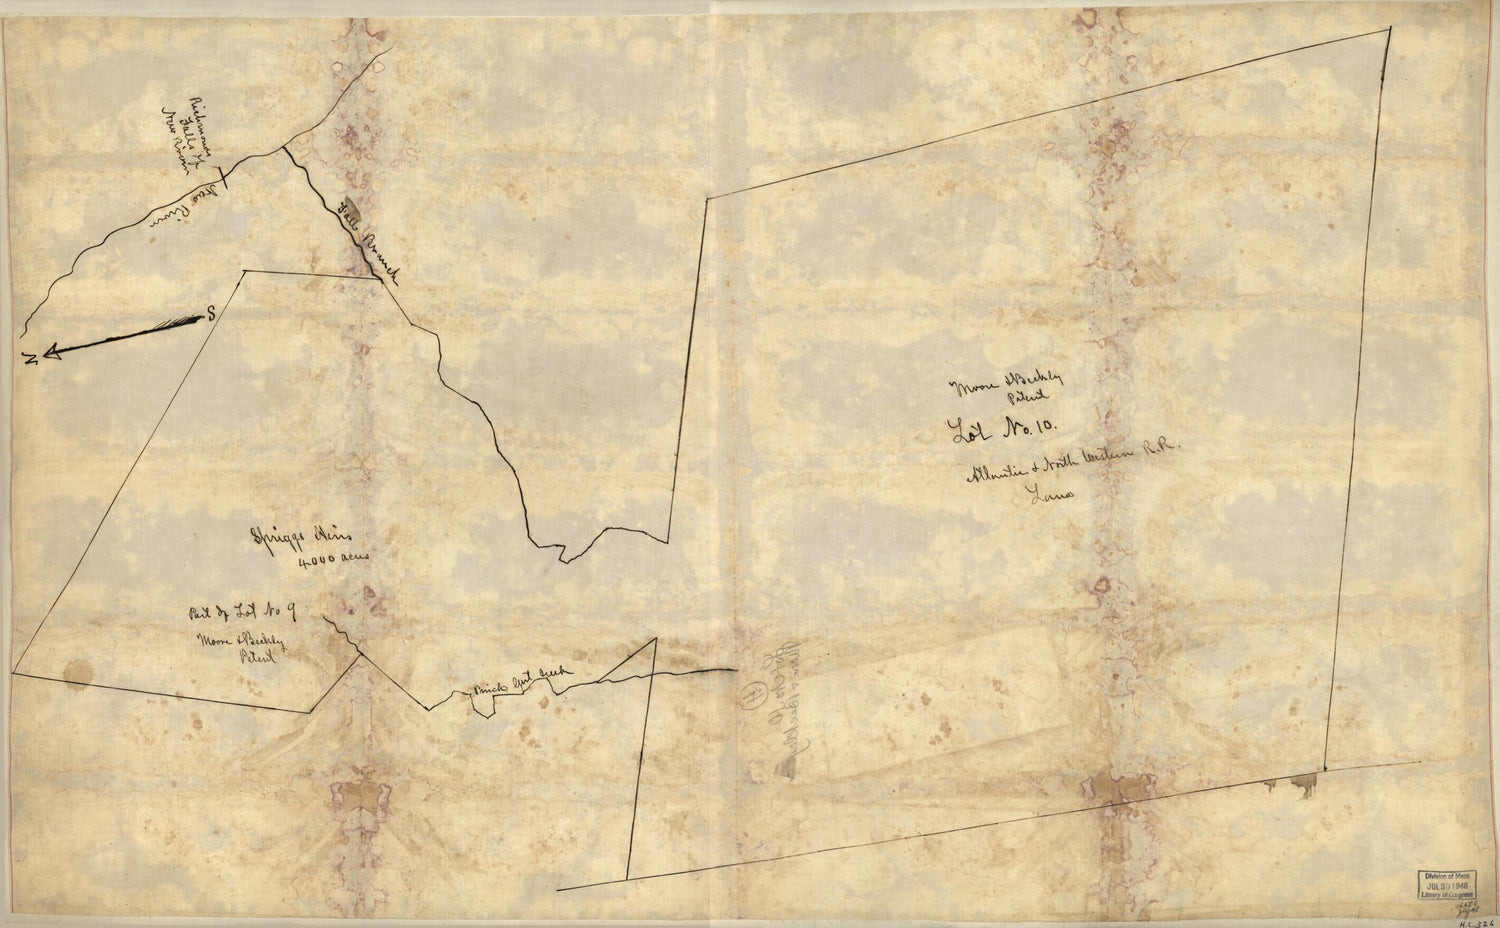 This old map of Moore &amp; Beckly i.e. Beckley Patent, Lot No. 10, Atlantic &amp; North Western R.R. Land. (Moore and Beckley Patent, Lot Number 10, Atlantic and North Western R.R. Land) from 1880 was created by  in 1880